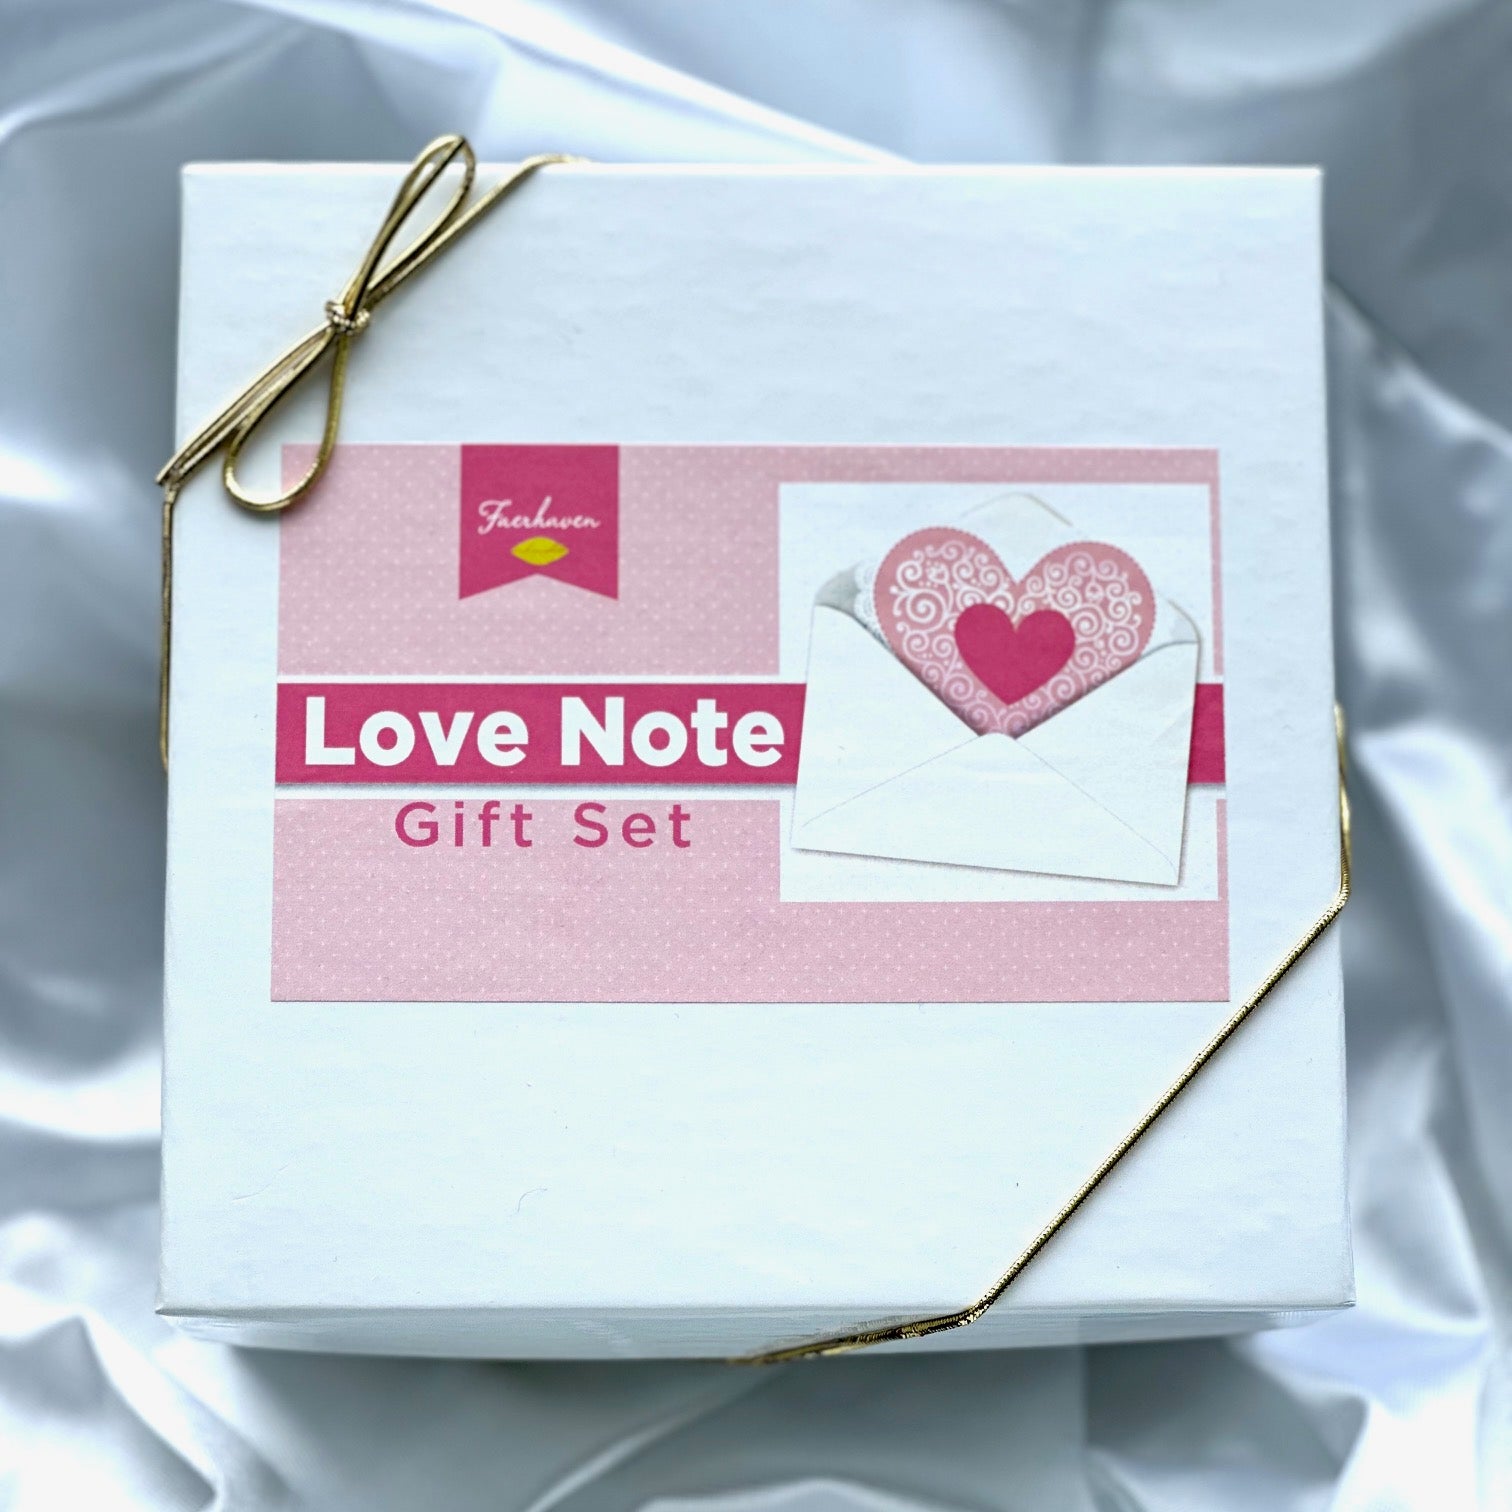 Love Note Gift Set (Limited Edition)